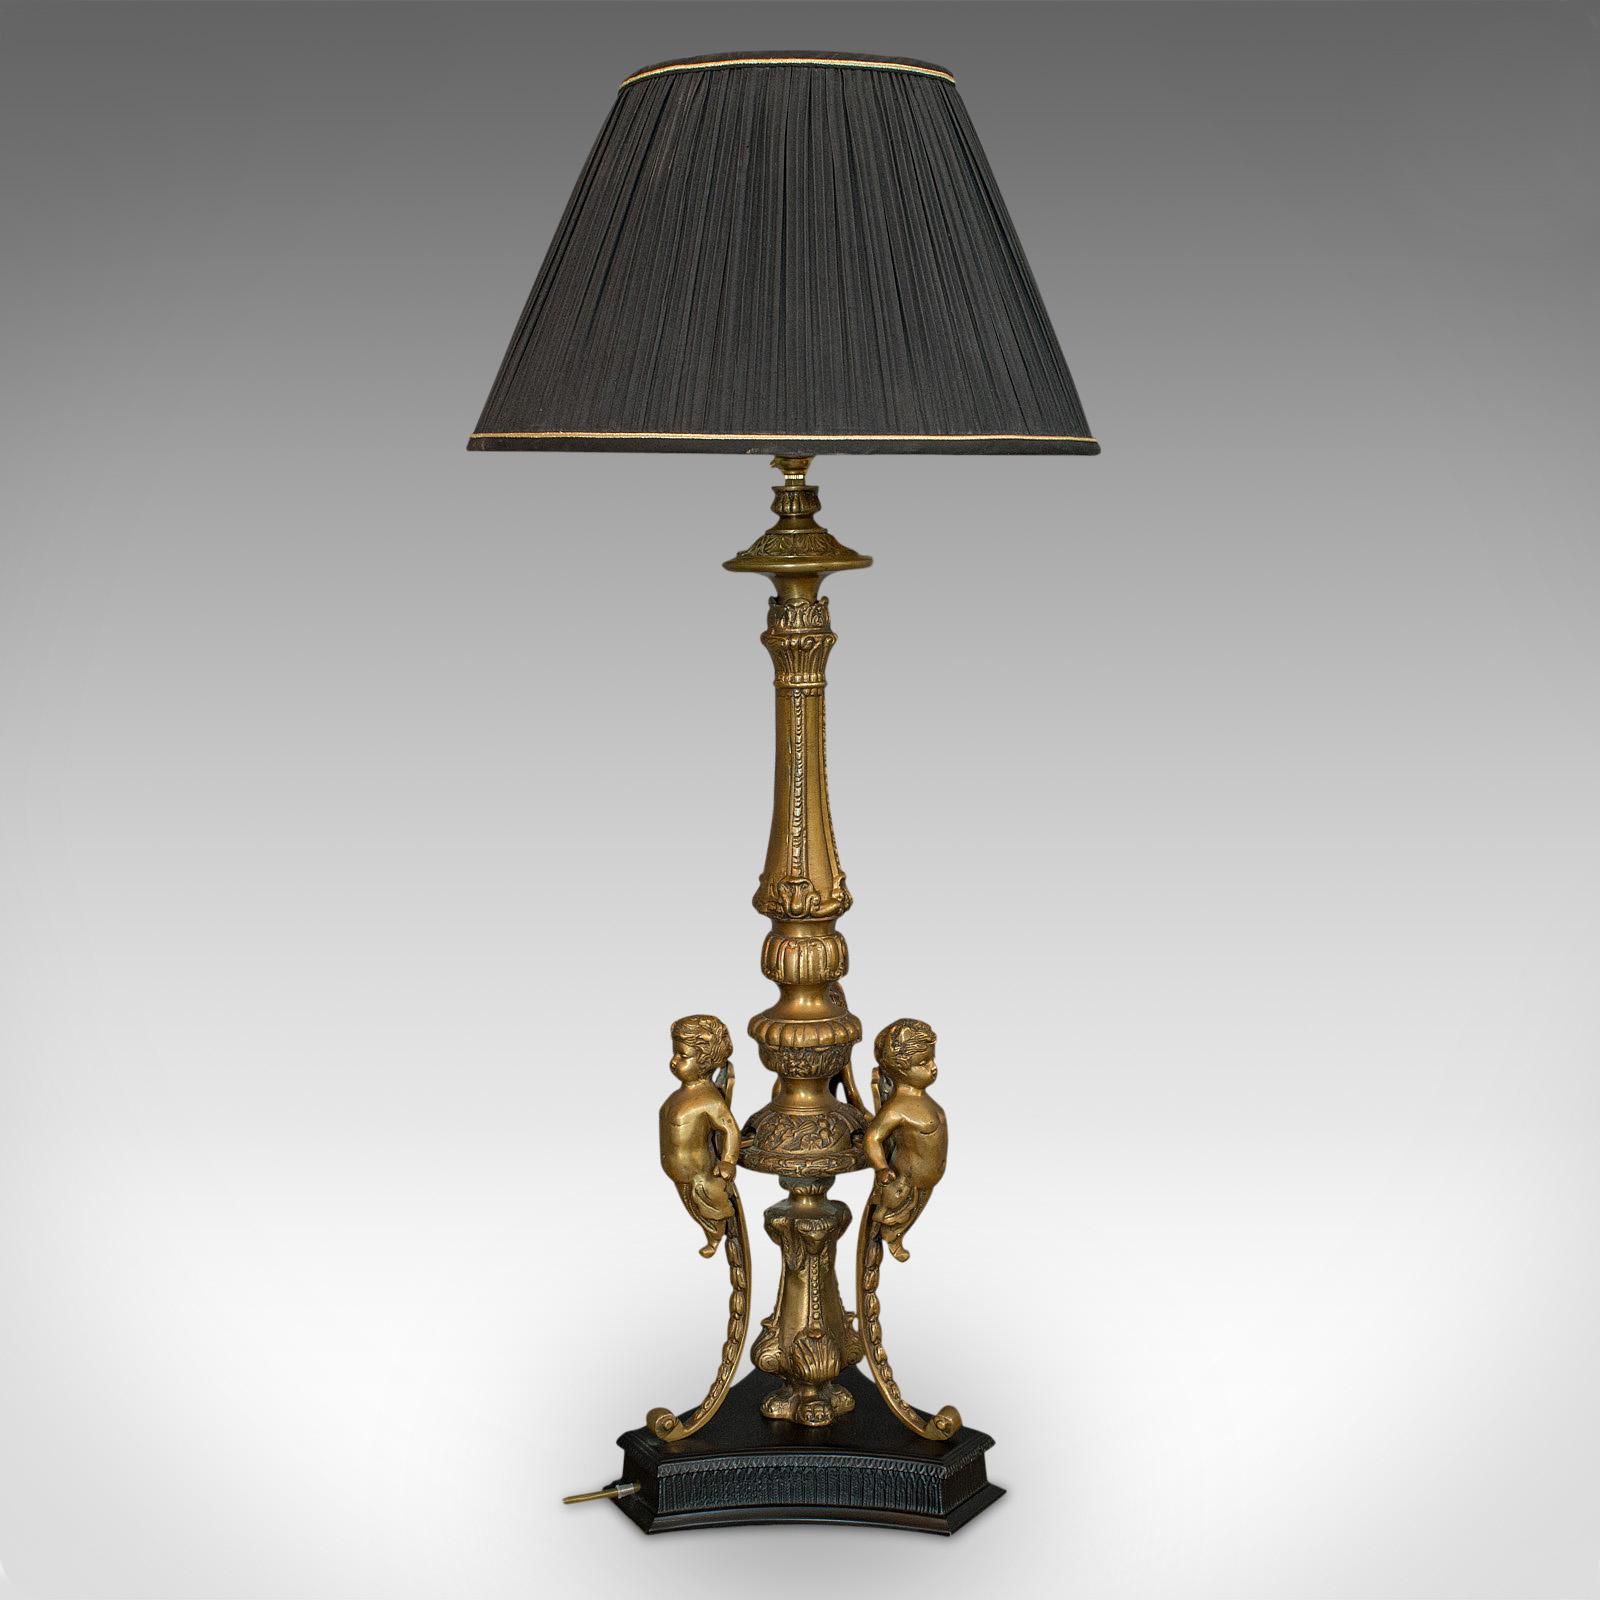 Vintage Table Top Lamp, Gilt Metal, Cherubic Light, 20th Century, circa 1990 In Good Condition For Sale In Hele, Devon, GB